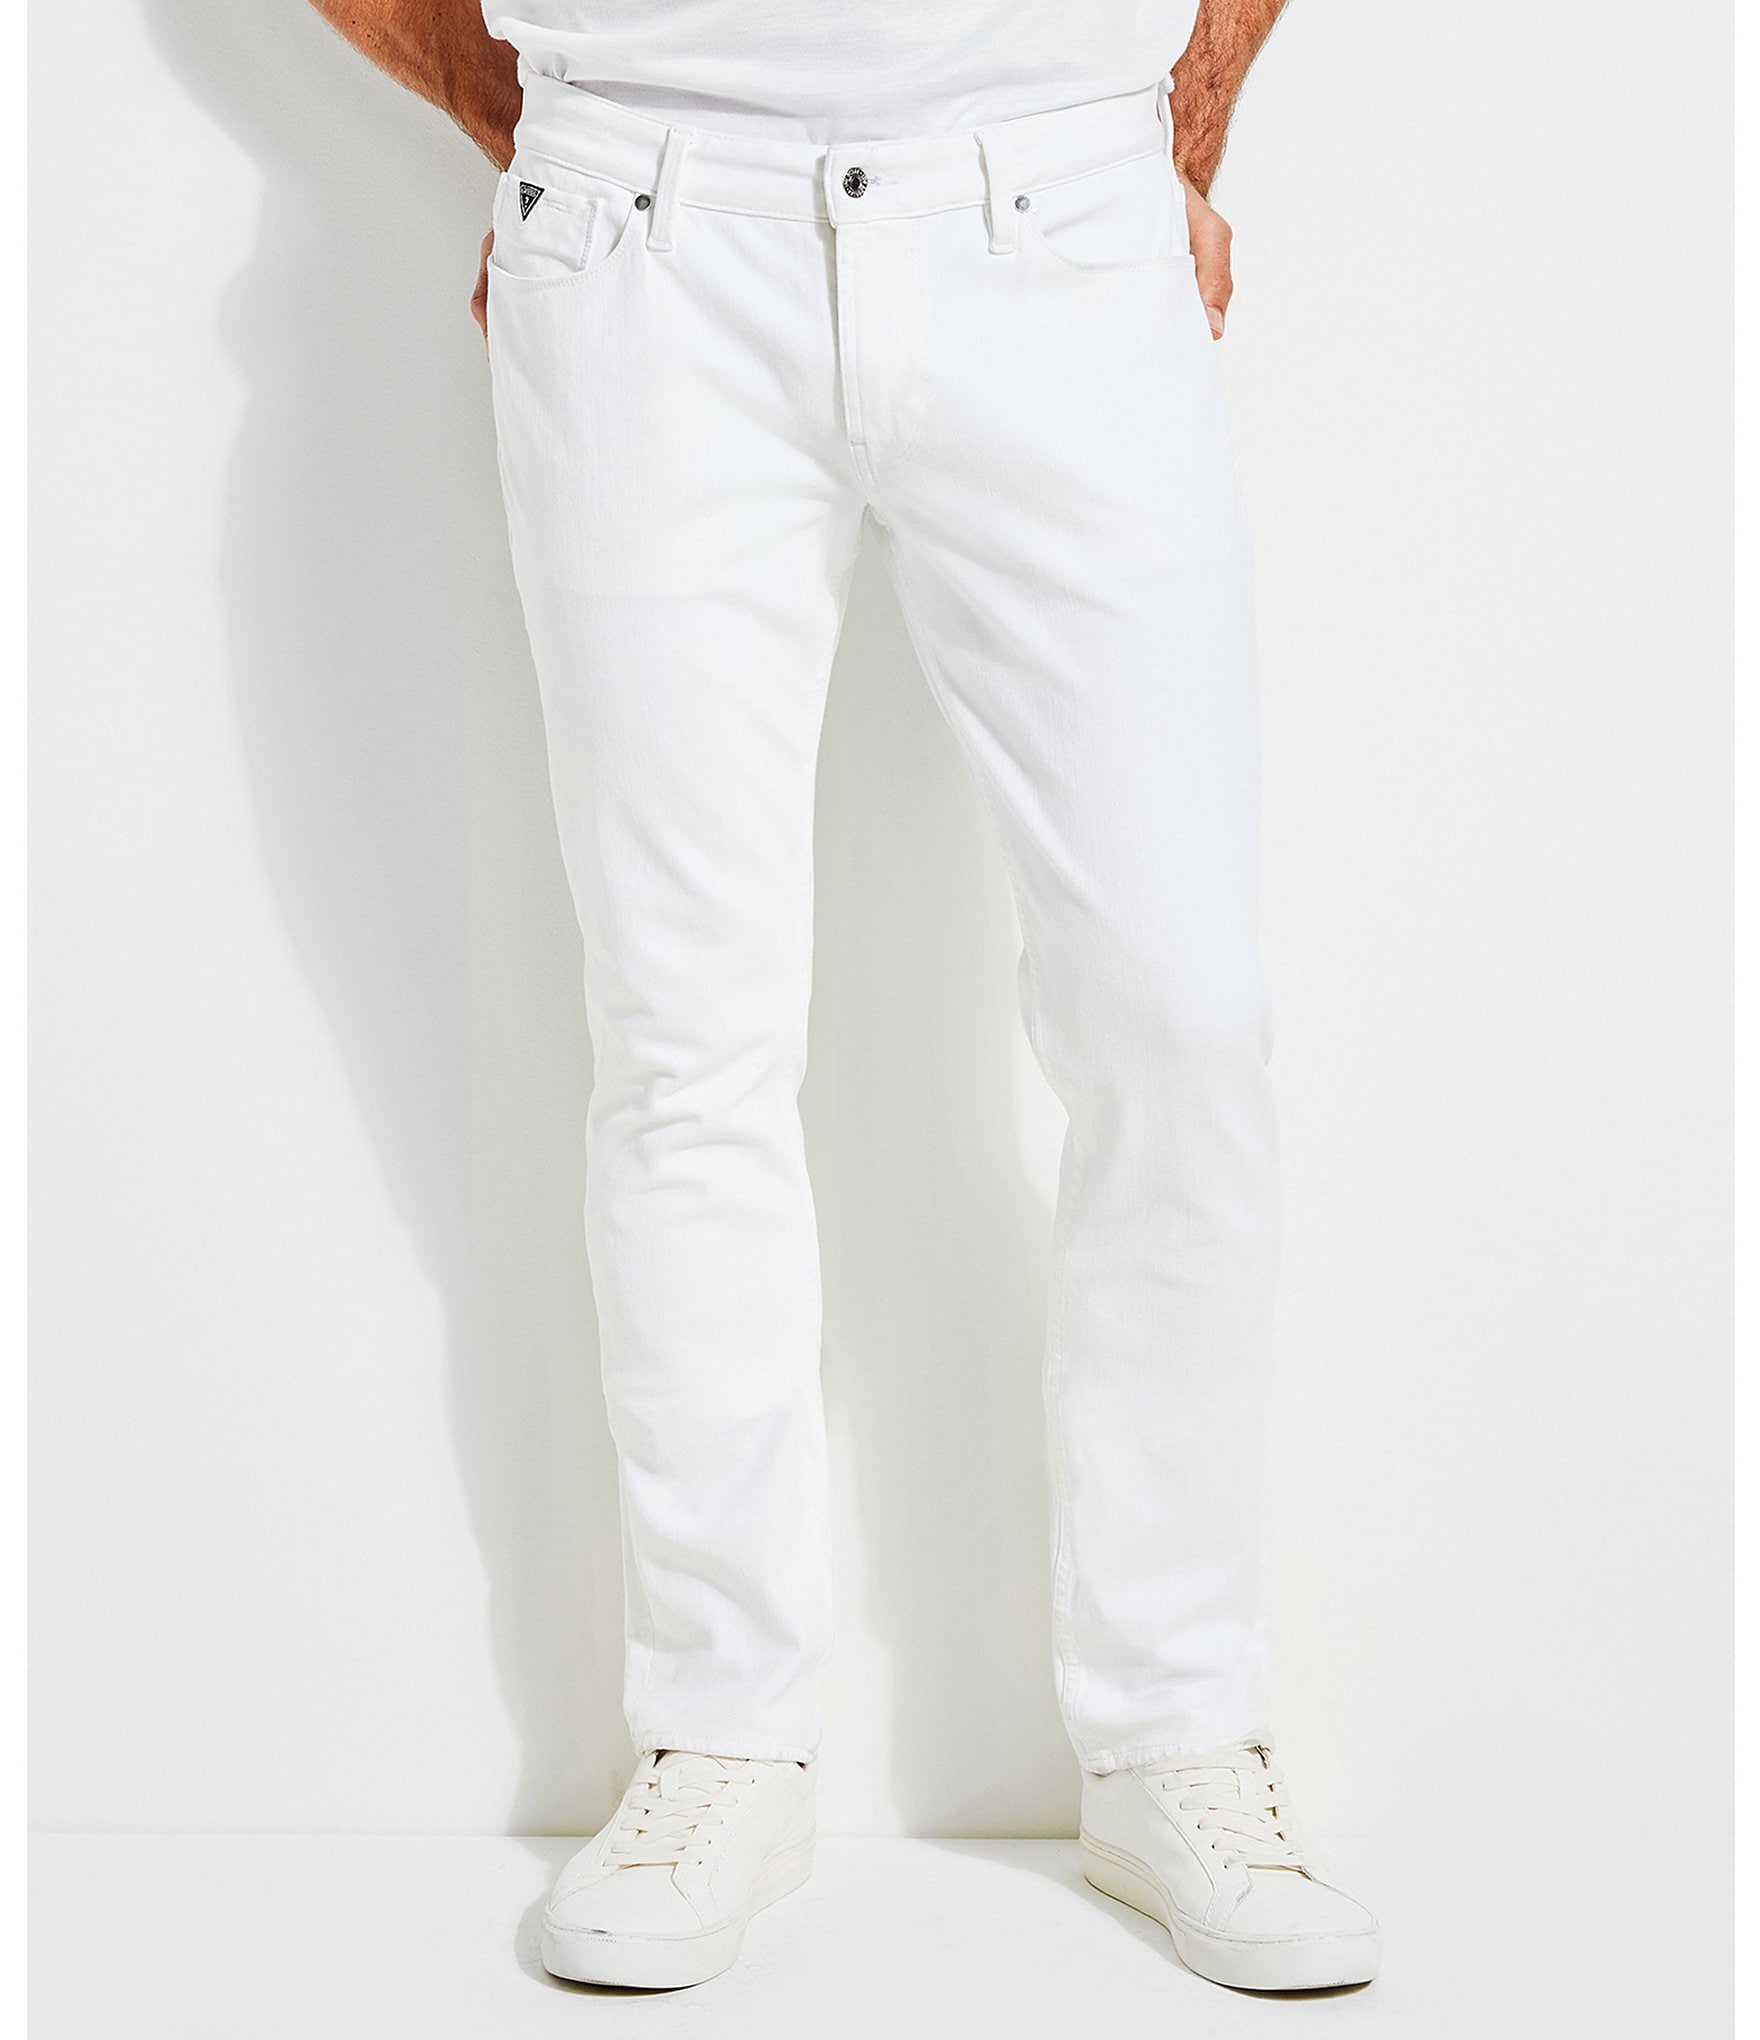 Guess Slim Tapered White Jeans | Dillard's